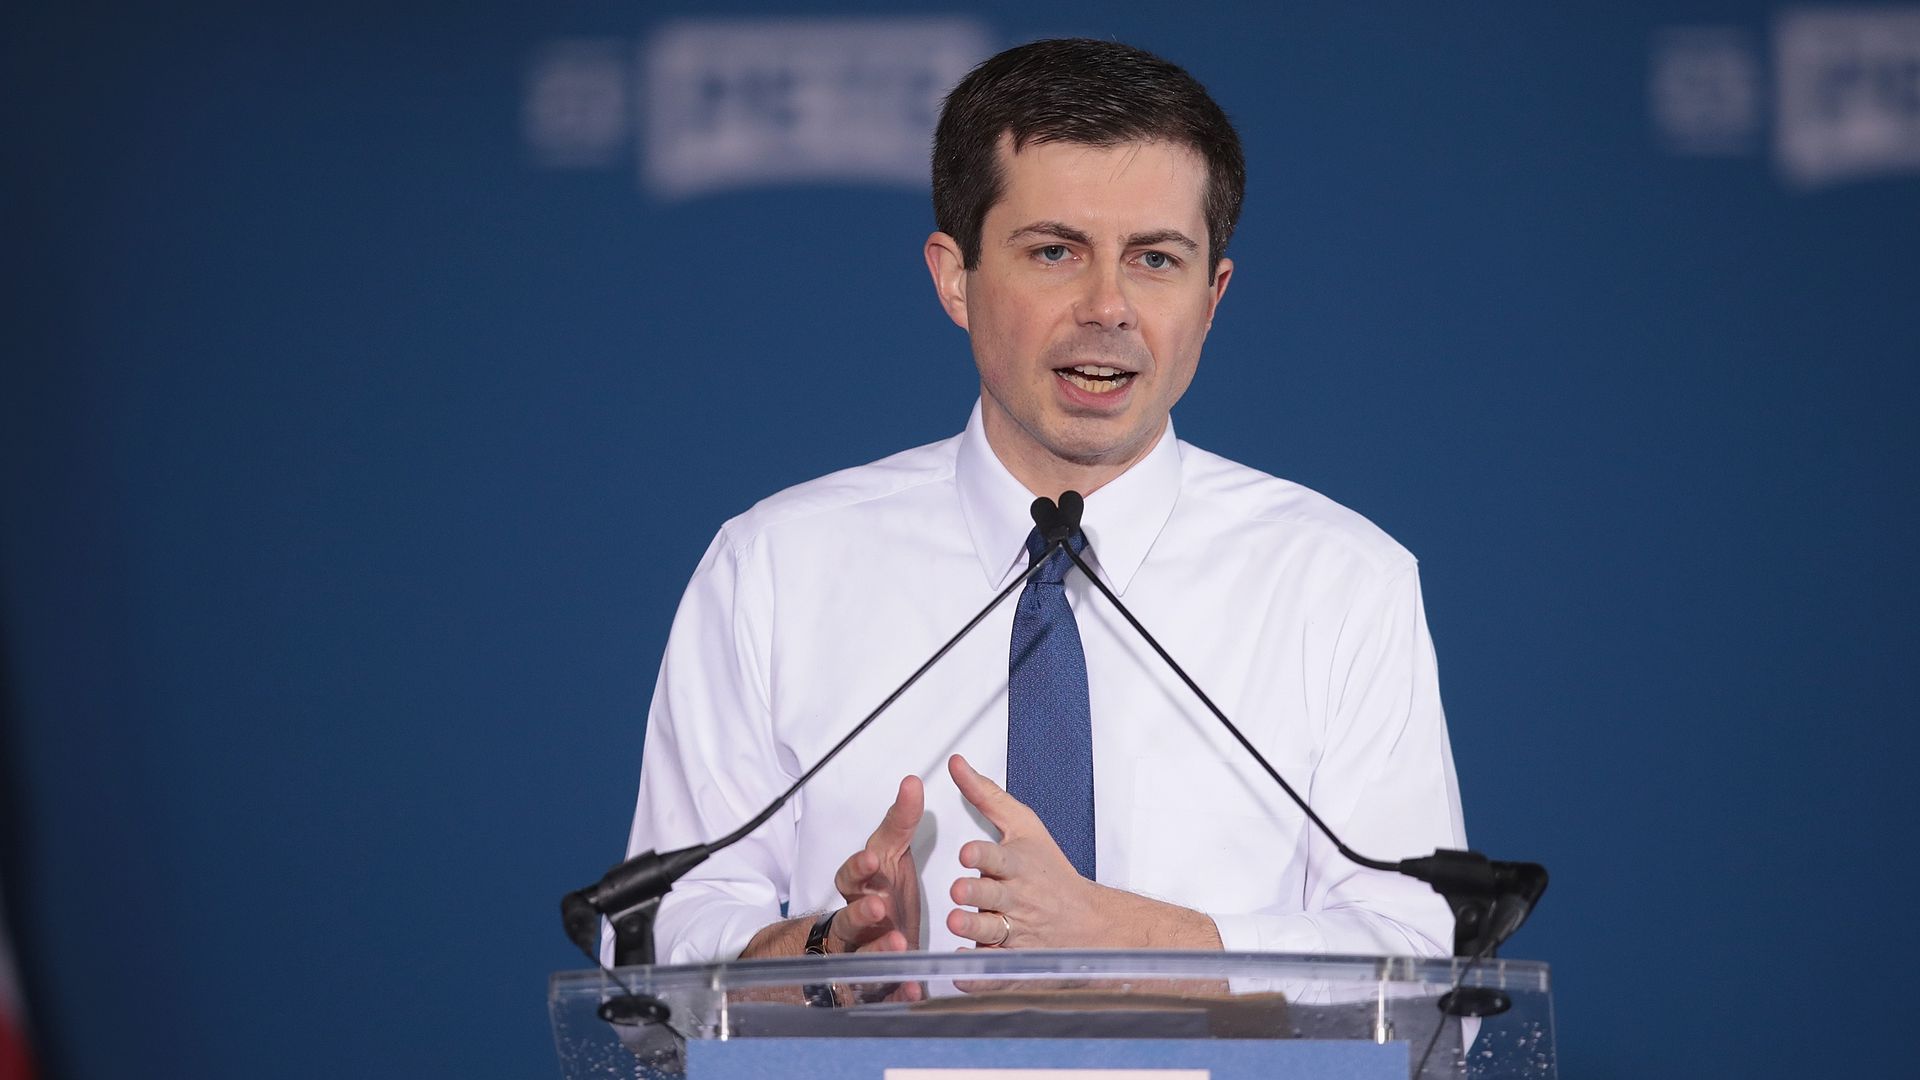 Pete Buttigieg opened up to MSNBC's Rachel Maddow on coming out as gay.